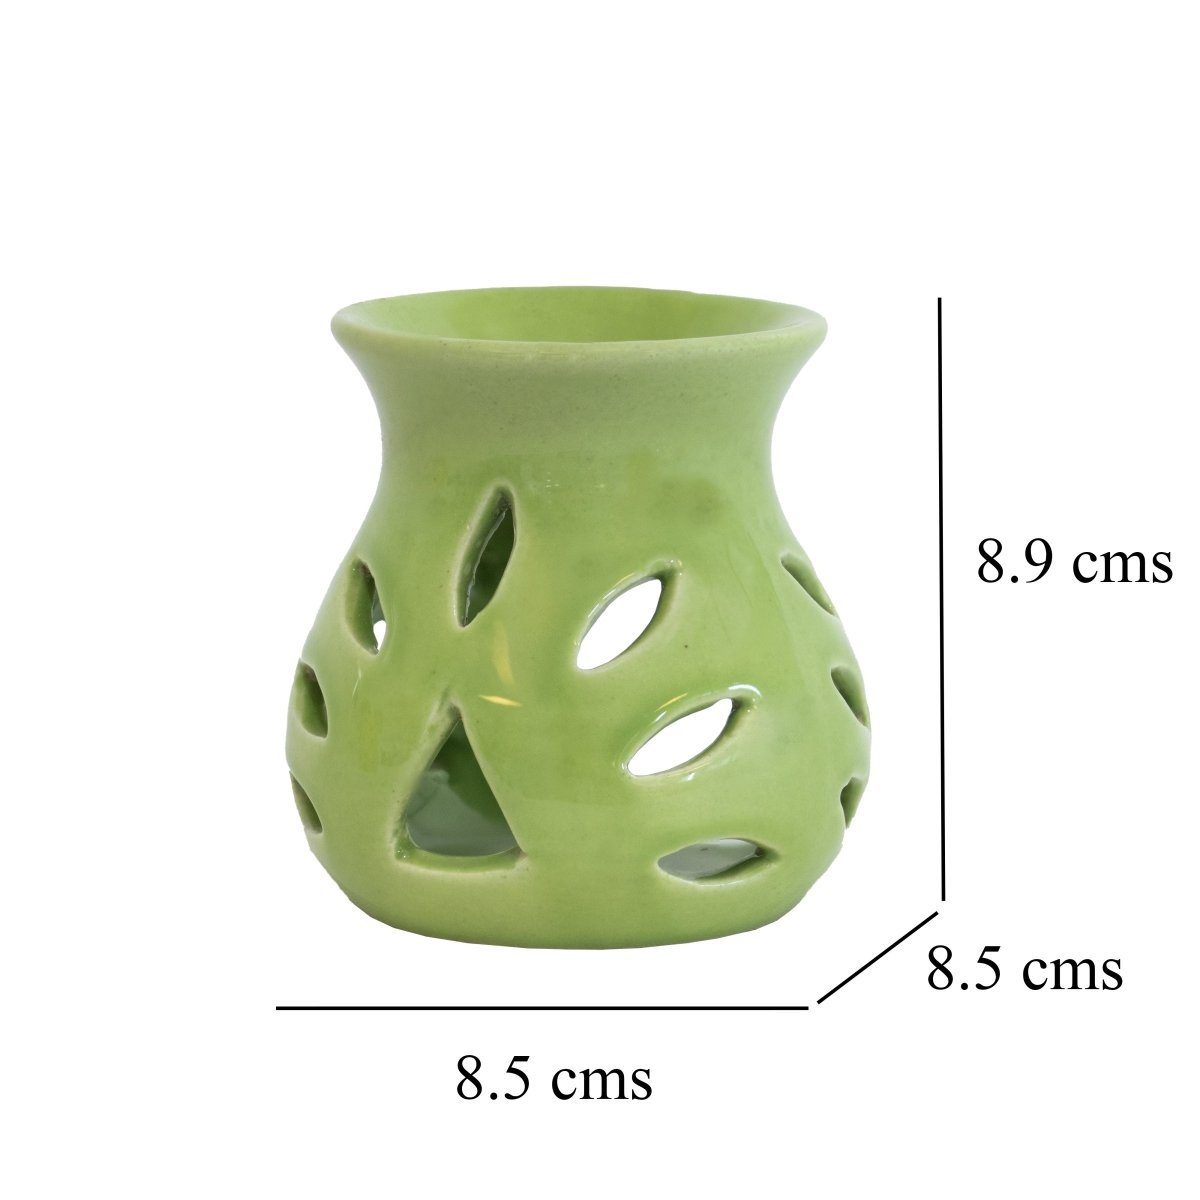 Kezevel Ceramic Tealight Candle Aroma Burner - Set of 2 Handcrafted Aroma Diffuser with Tealight Candle for Home Decoration